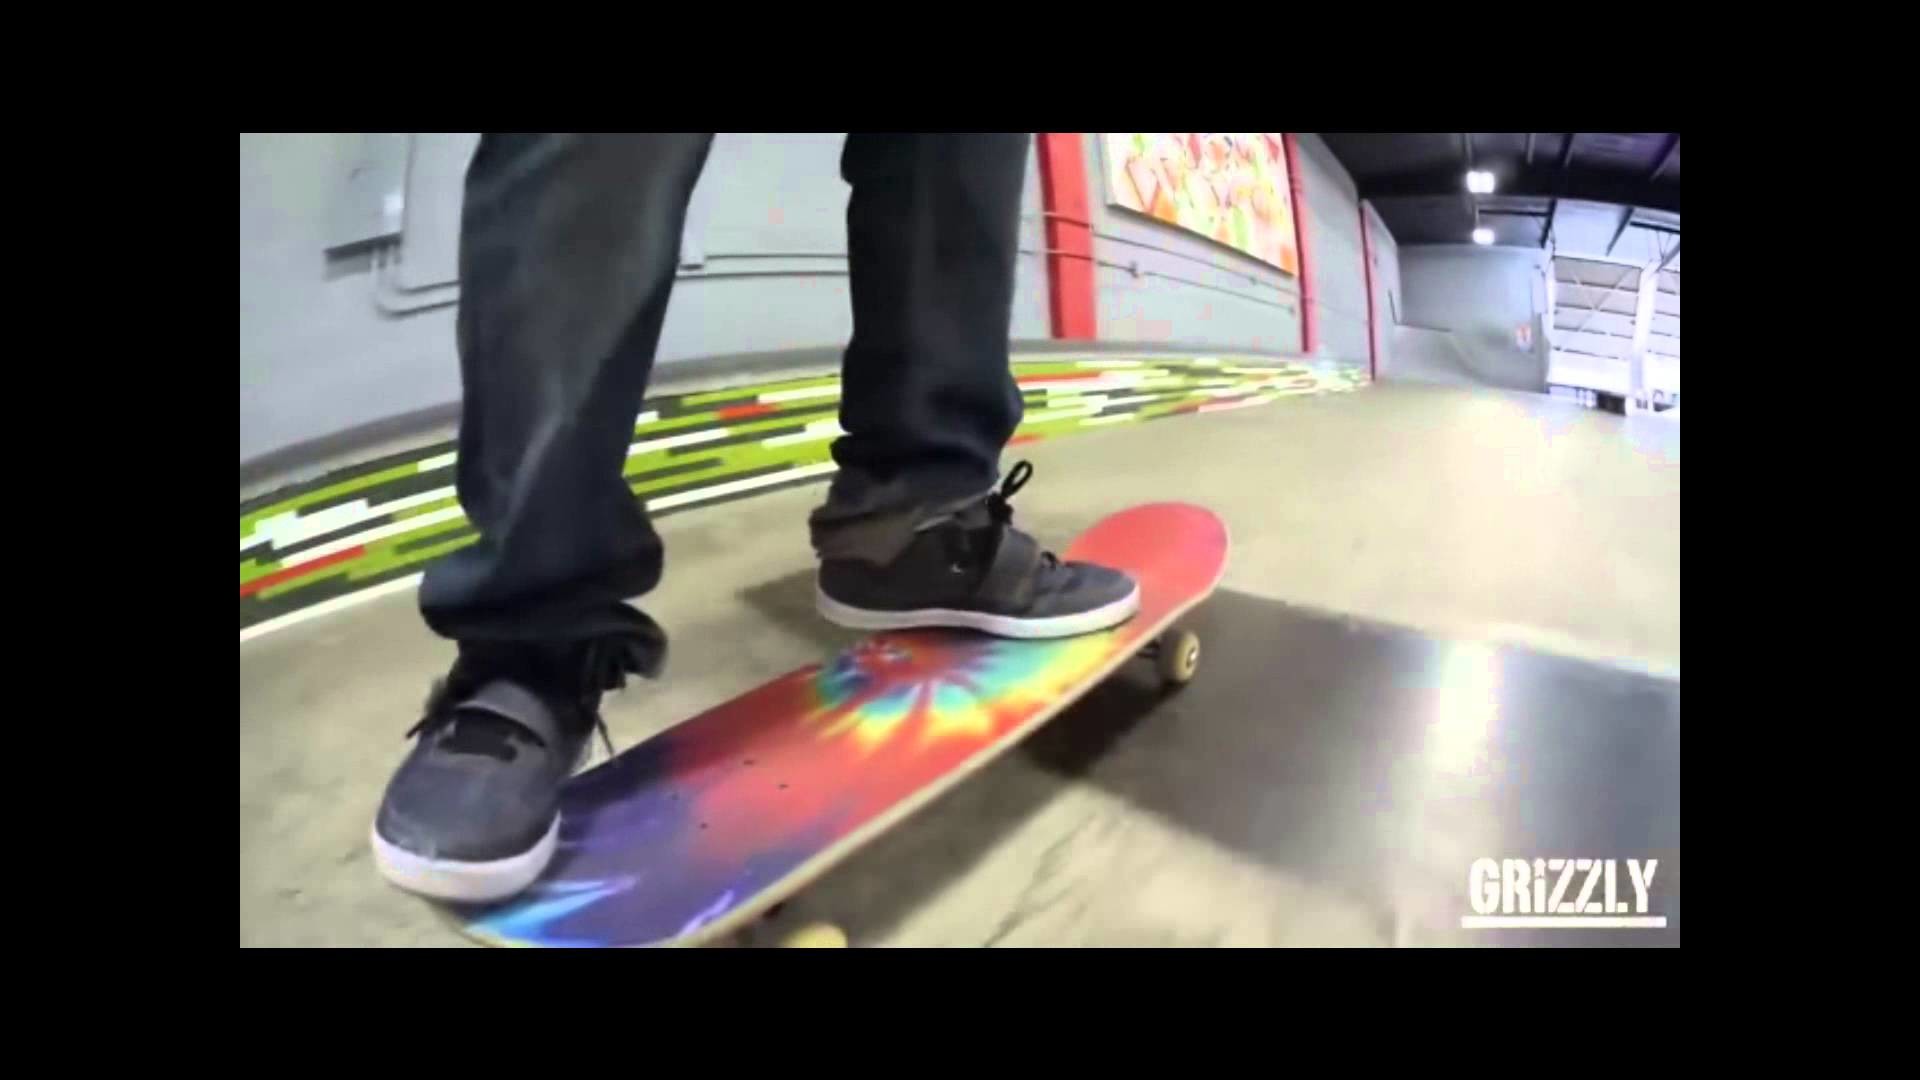 1920x1080 GRIZZLY: Torey Pudwill Grizzly Griptape Tie Dye Commercial